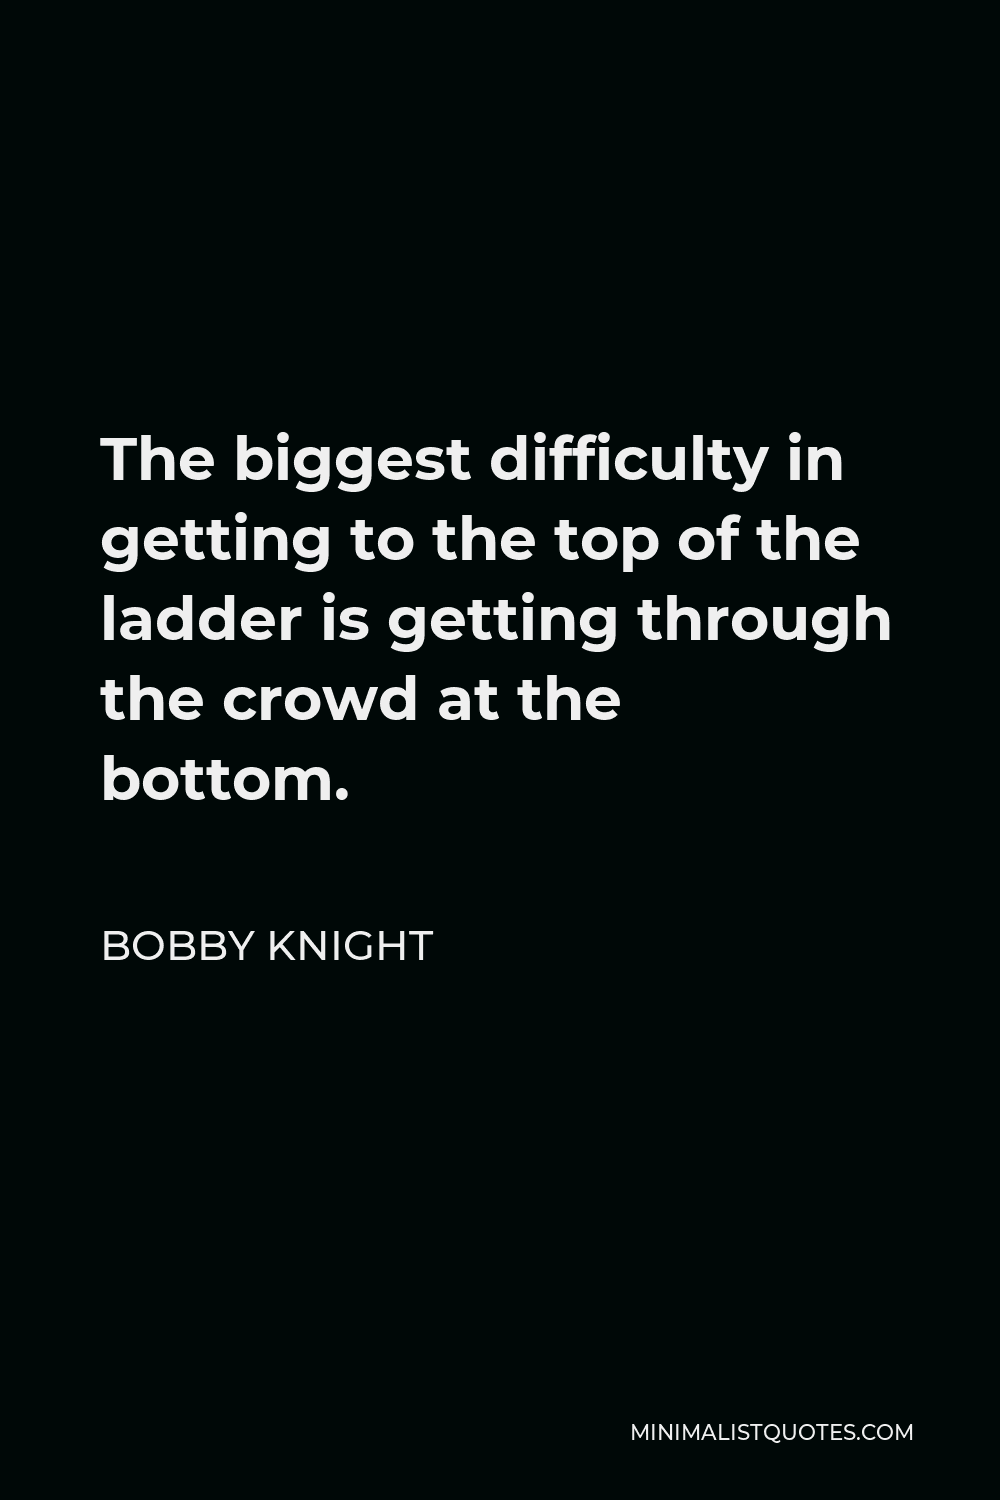 Bobby Knight Quote - The biggest difficulty in getting to the top of the ladder is getting through the crowd at the bottom.